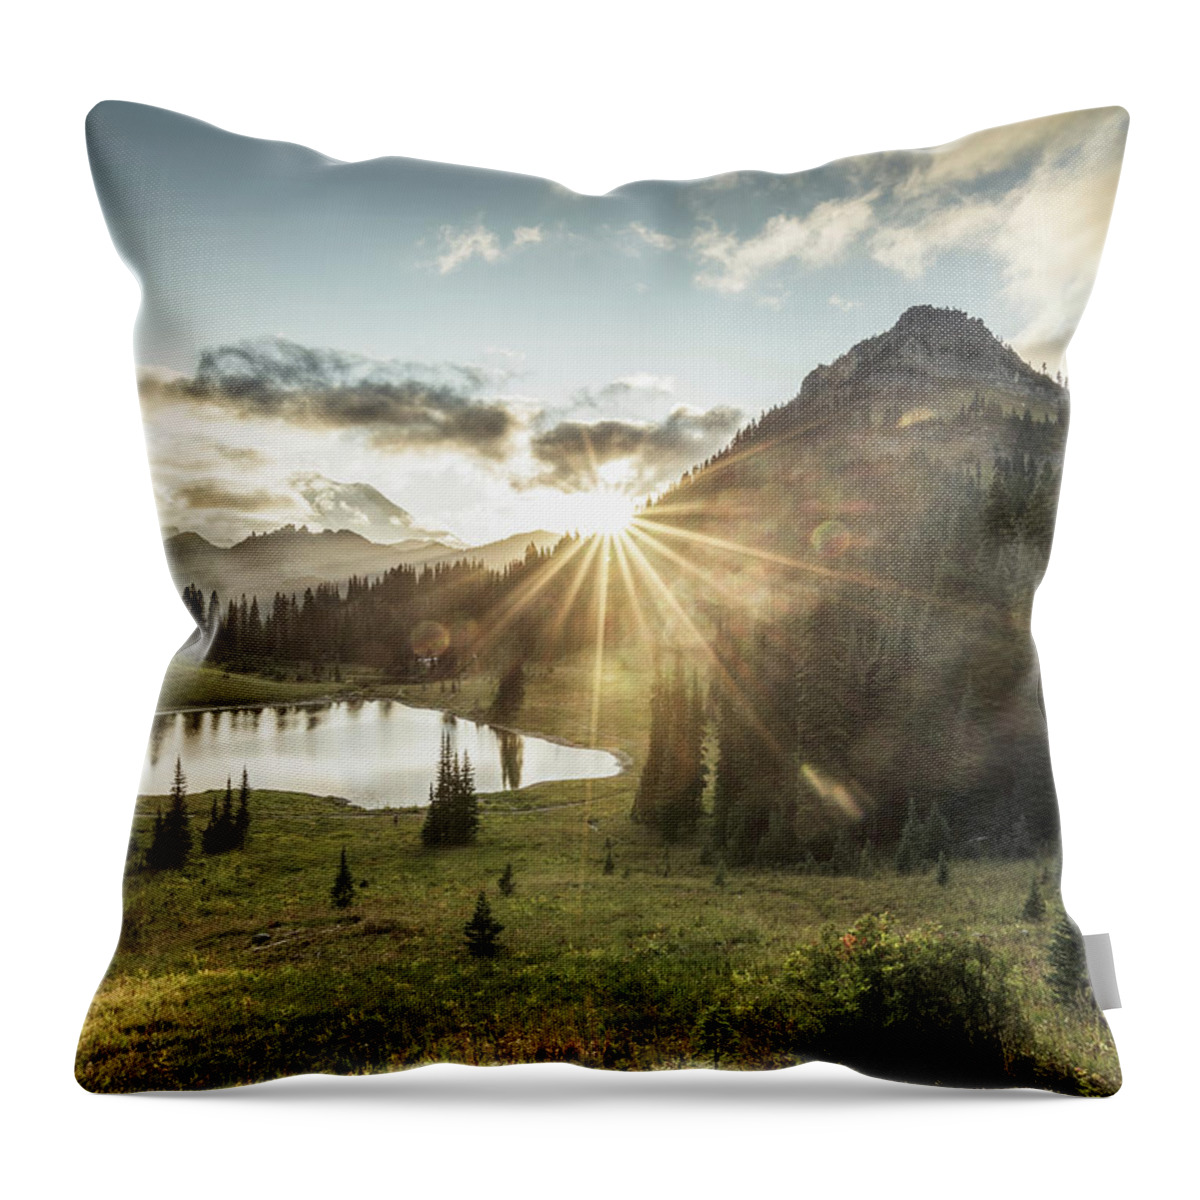 Scenics Throw Pillow featuring the photograph Mt.rainier In Sunset by Chinaface